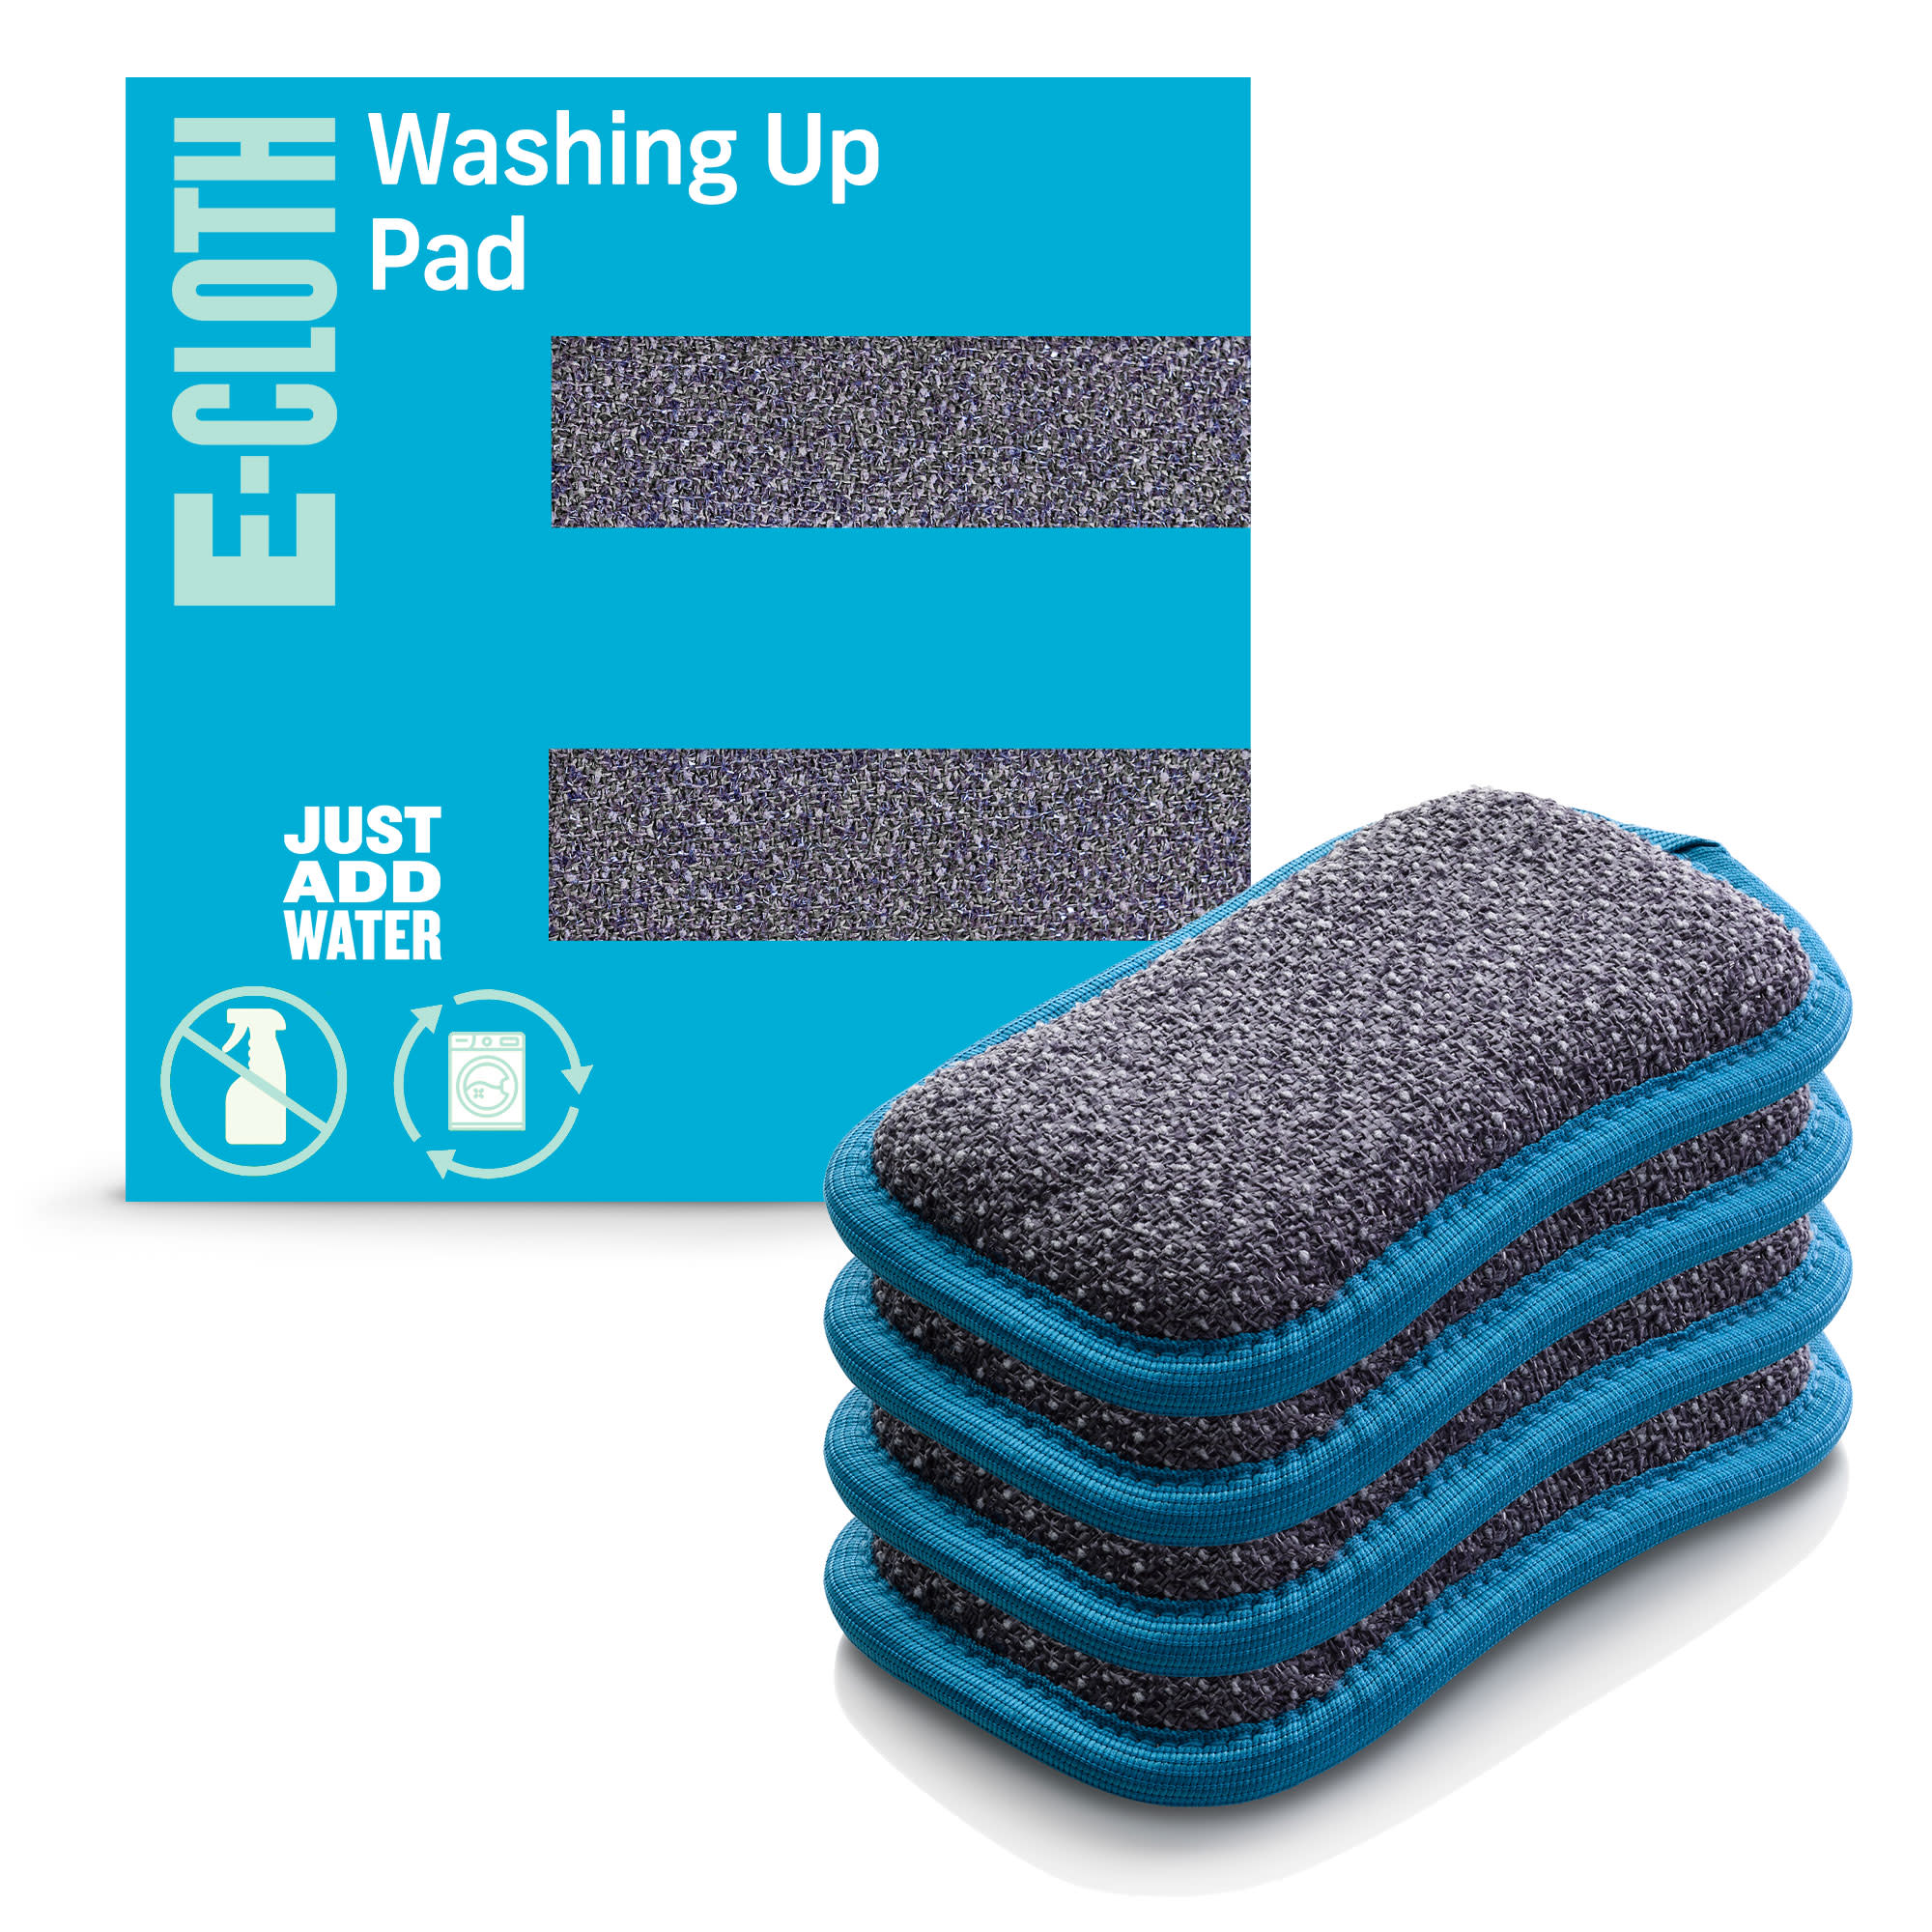 E-Cloth Washing Up Pad Non-scratch Kitchen Dish Scrubber Microfiber Sponge, Blue, 4 Pack - image 1 of 7